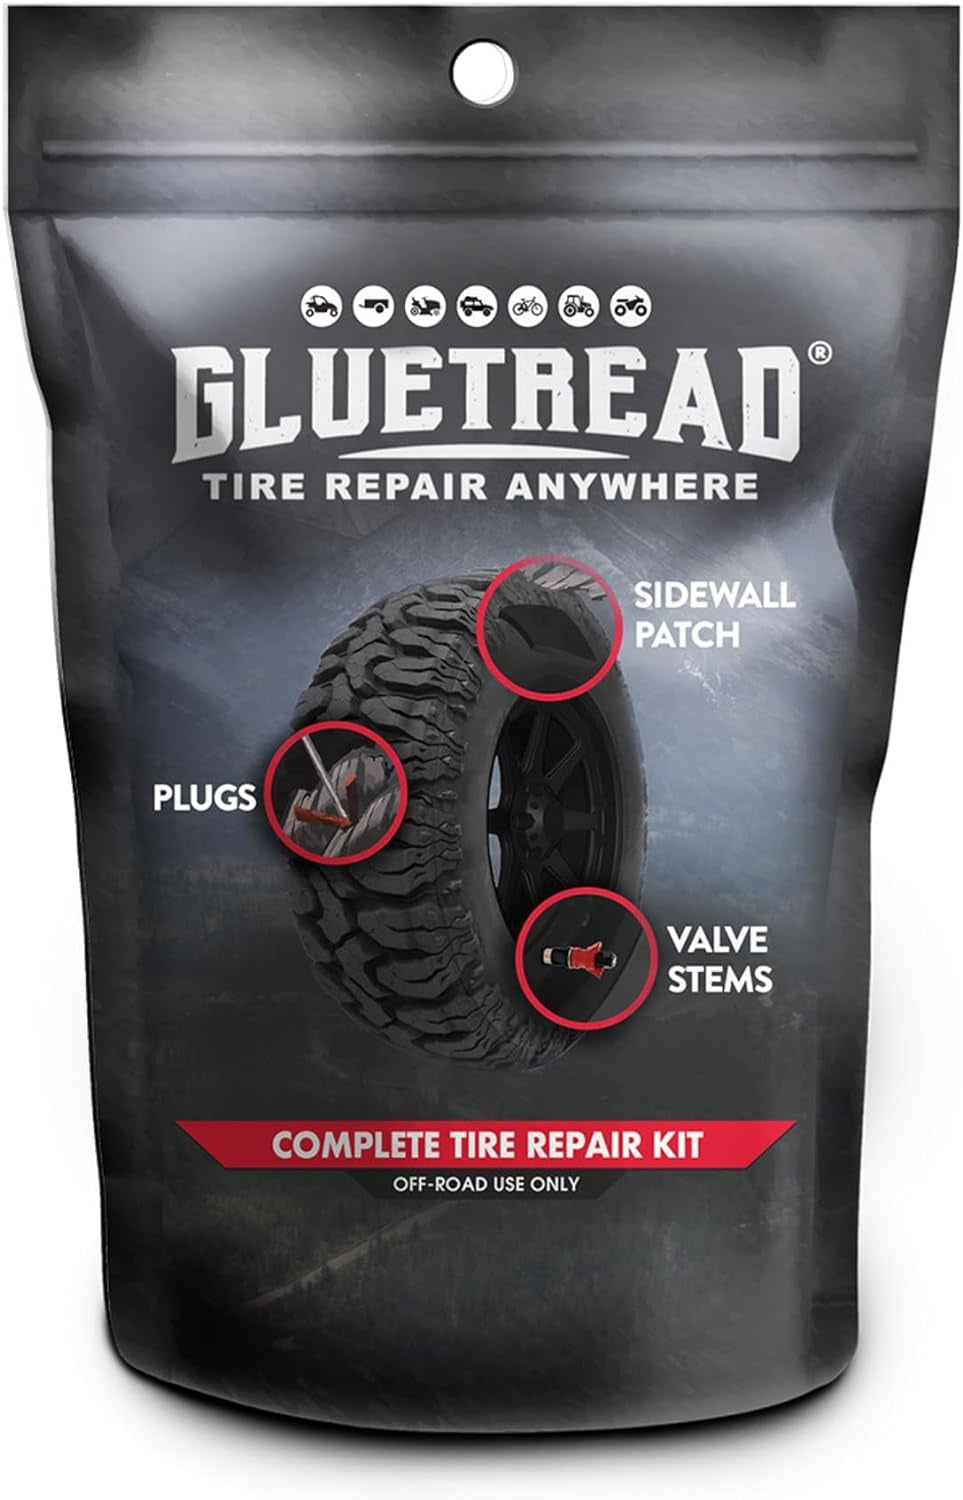 Gluetread Complete Off-Road Tire Repair Kit | Repair Any Kind of Puncture | Kit Includes Sidewall Tire Repair Patches, Plugs and Colby Emergency Valve Stems